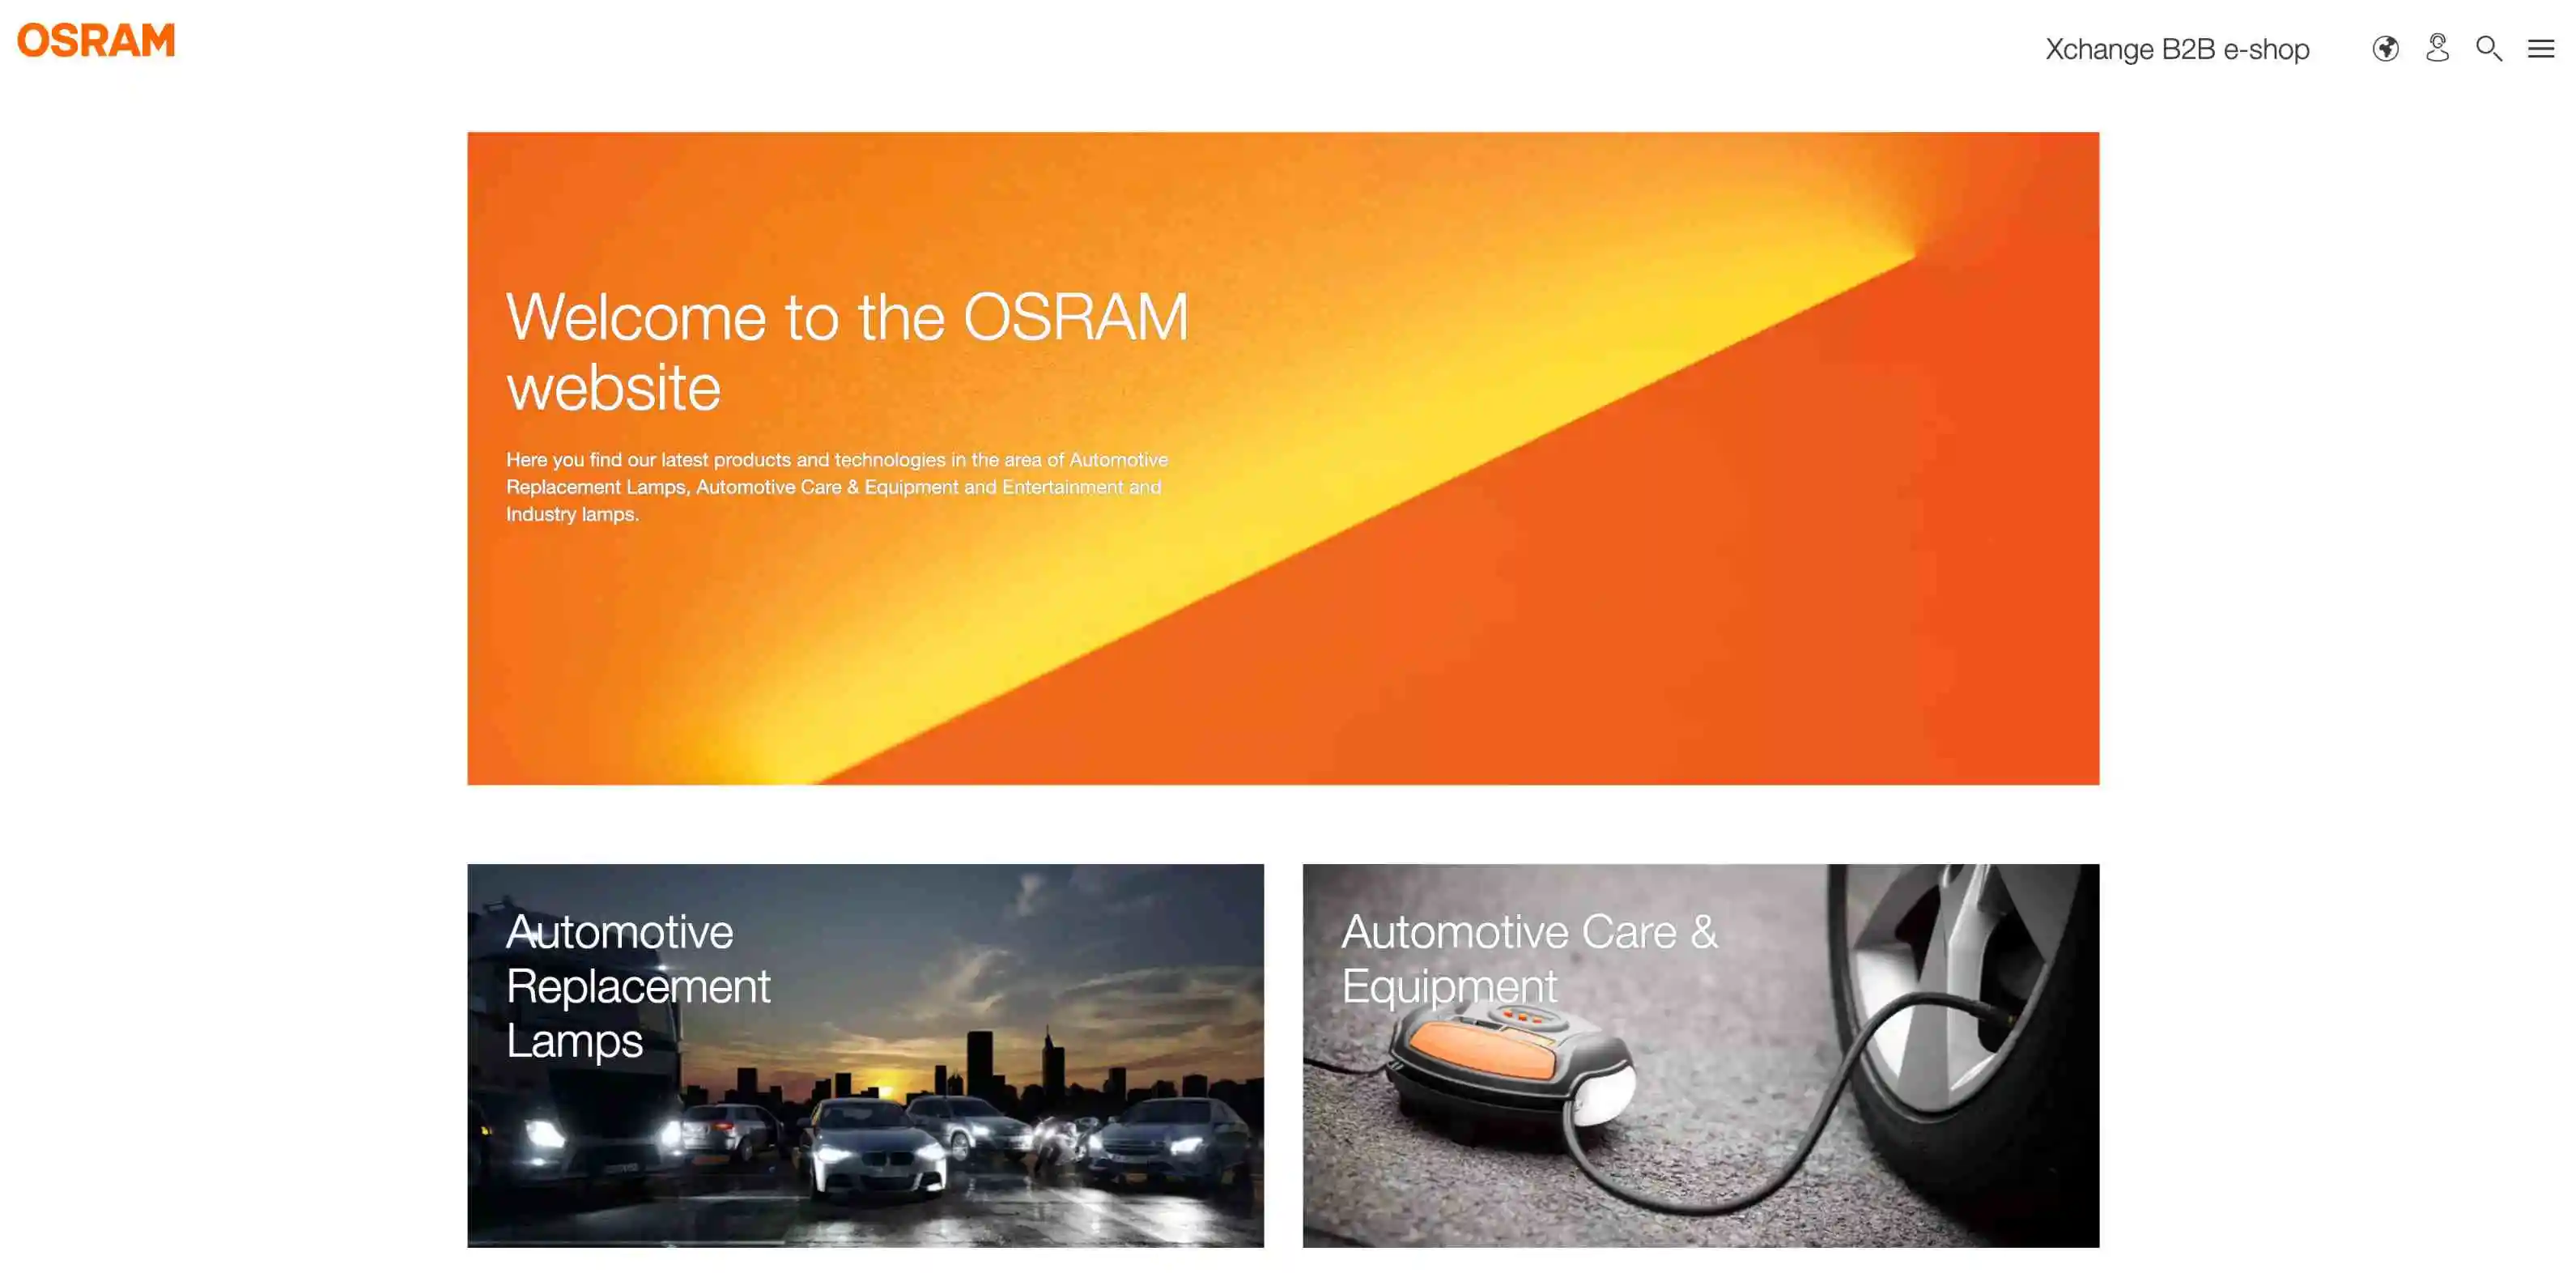 1Osram lighting company website showcasing their products and service